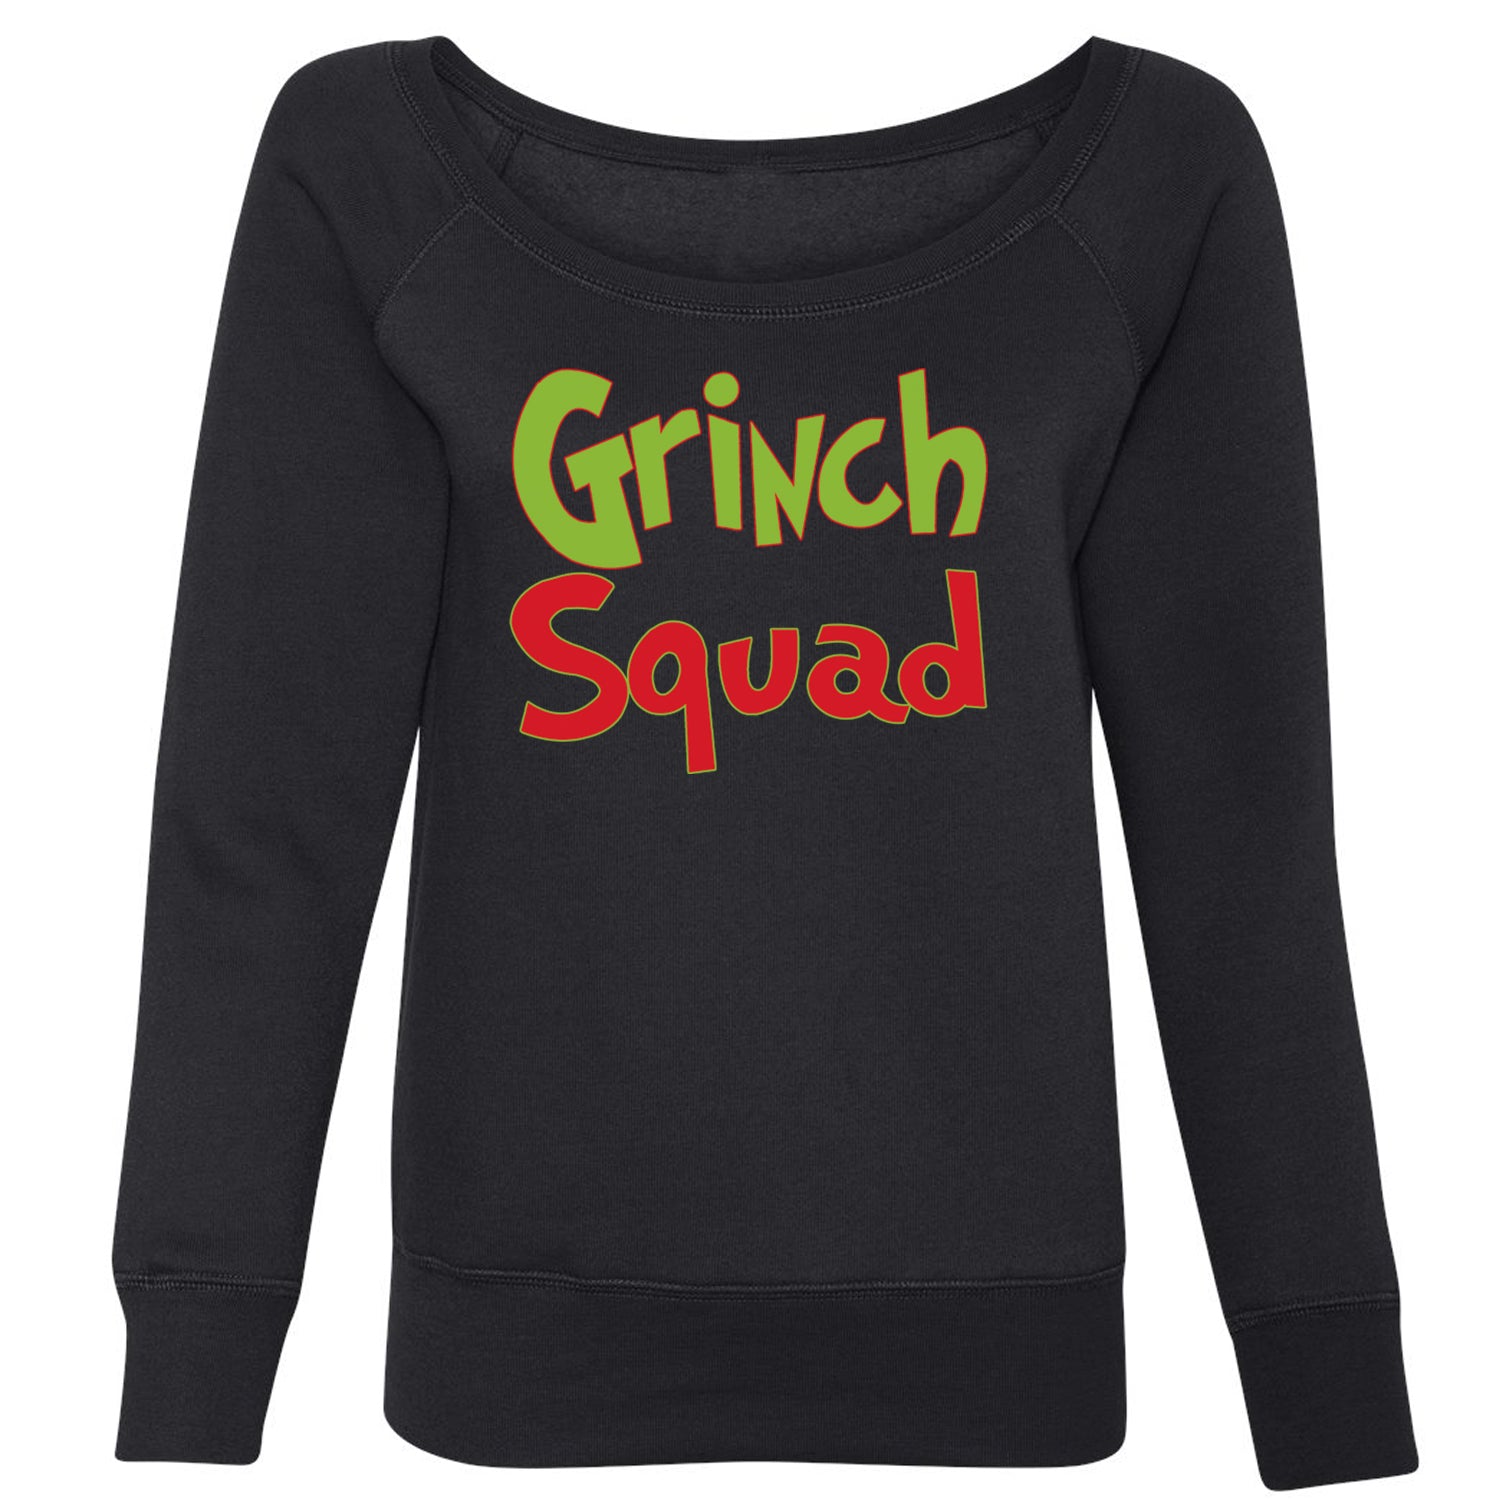 Gr-nch Squad Jolly Grinchmas Merry Christmas Slouchy Off Shoulder Oversized Sweatshirt